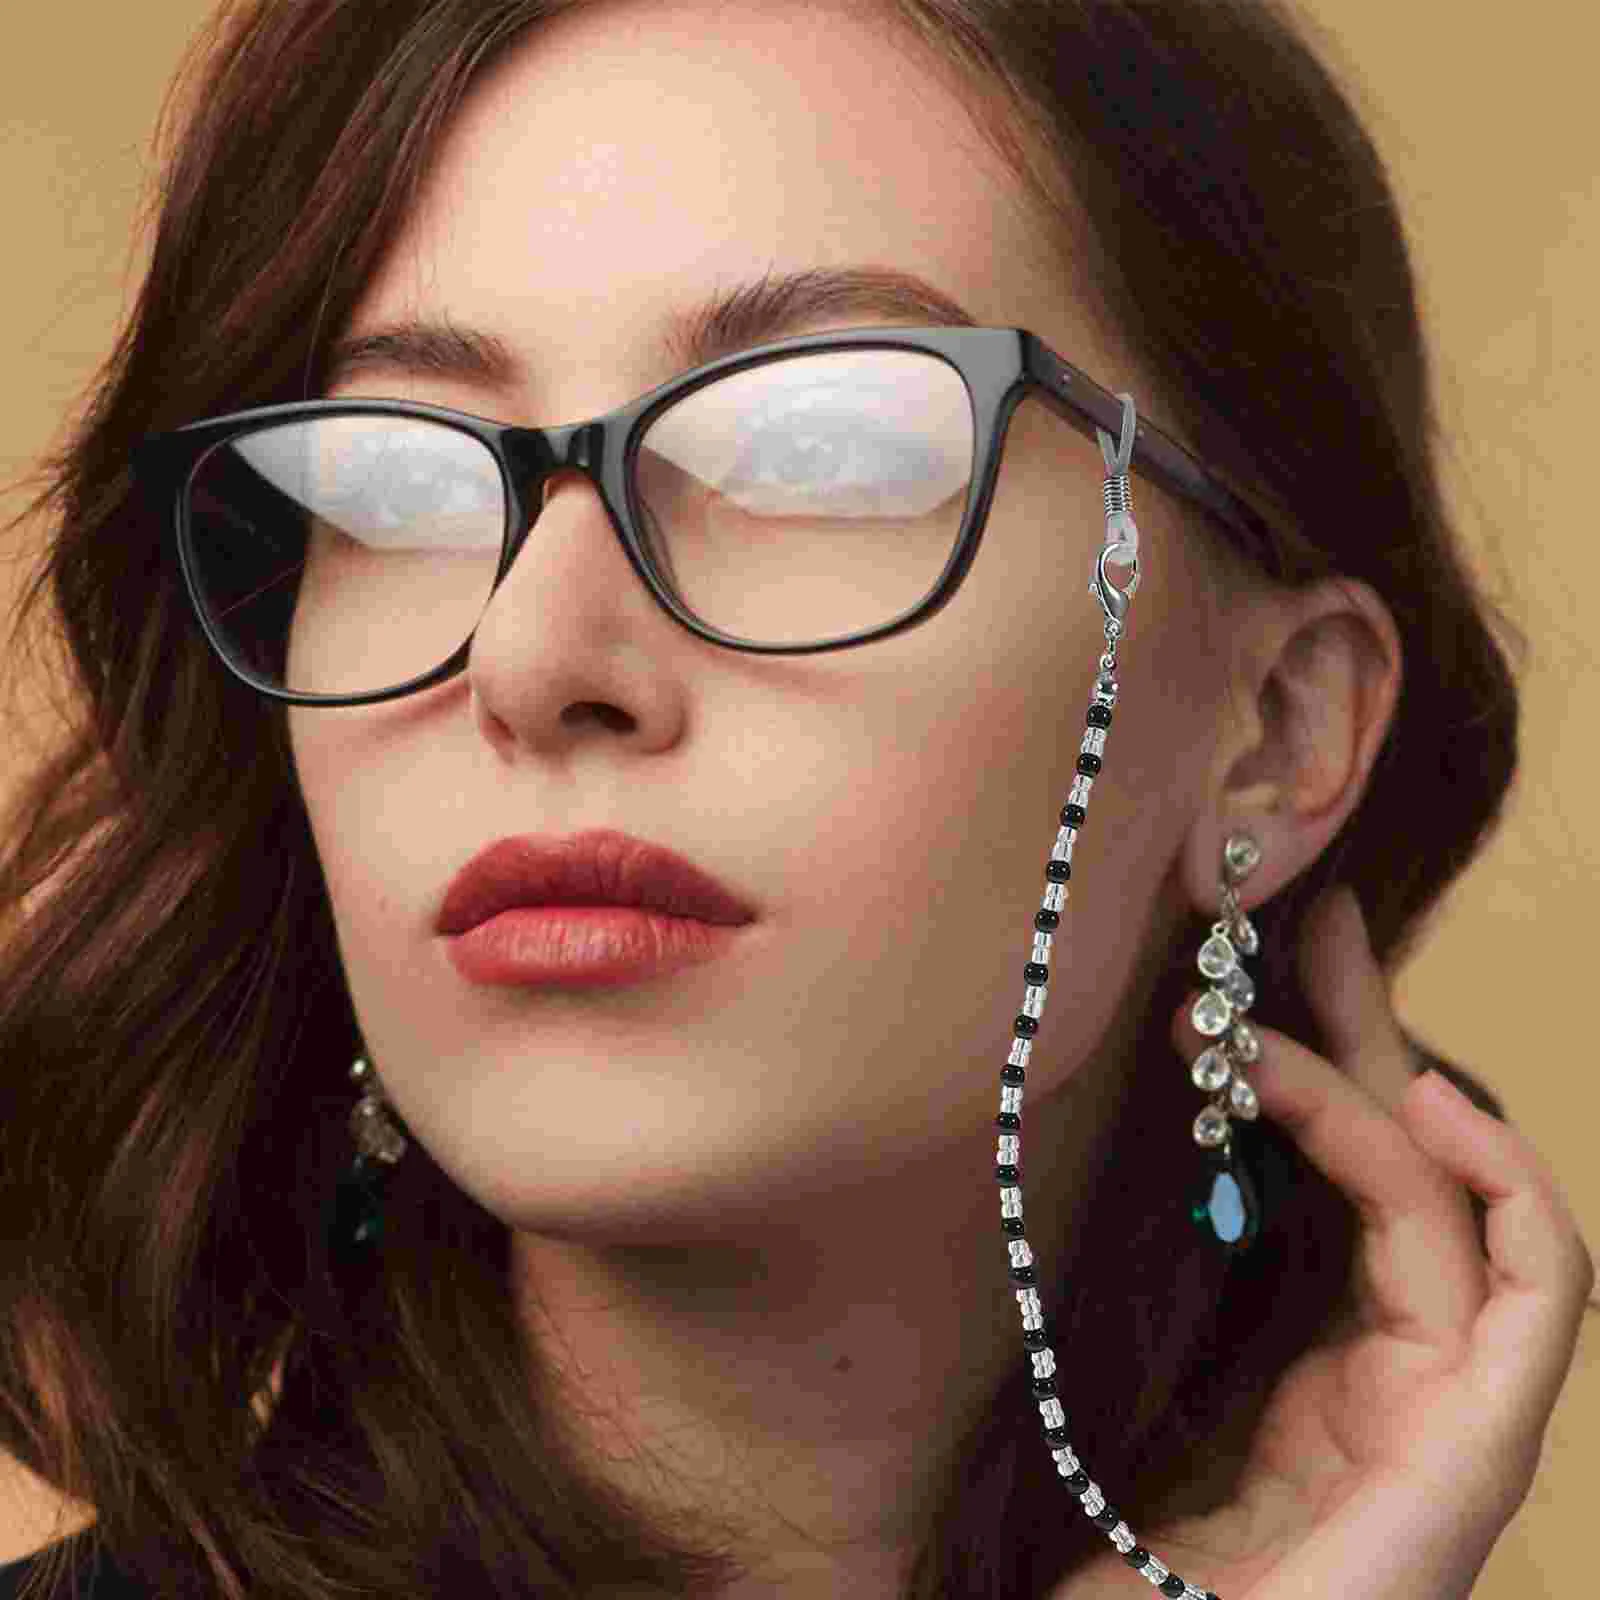 

Black and White Glasses Chain Lanyard Frame Mask Holders Around Neck Plastic Pearls Sunglasses Chains for Women Miss